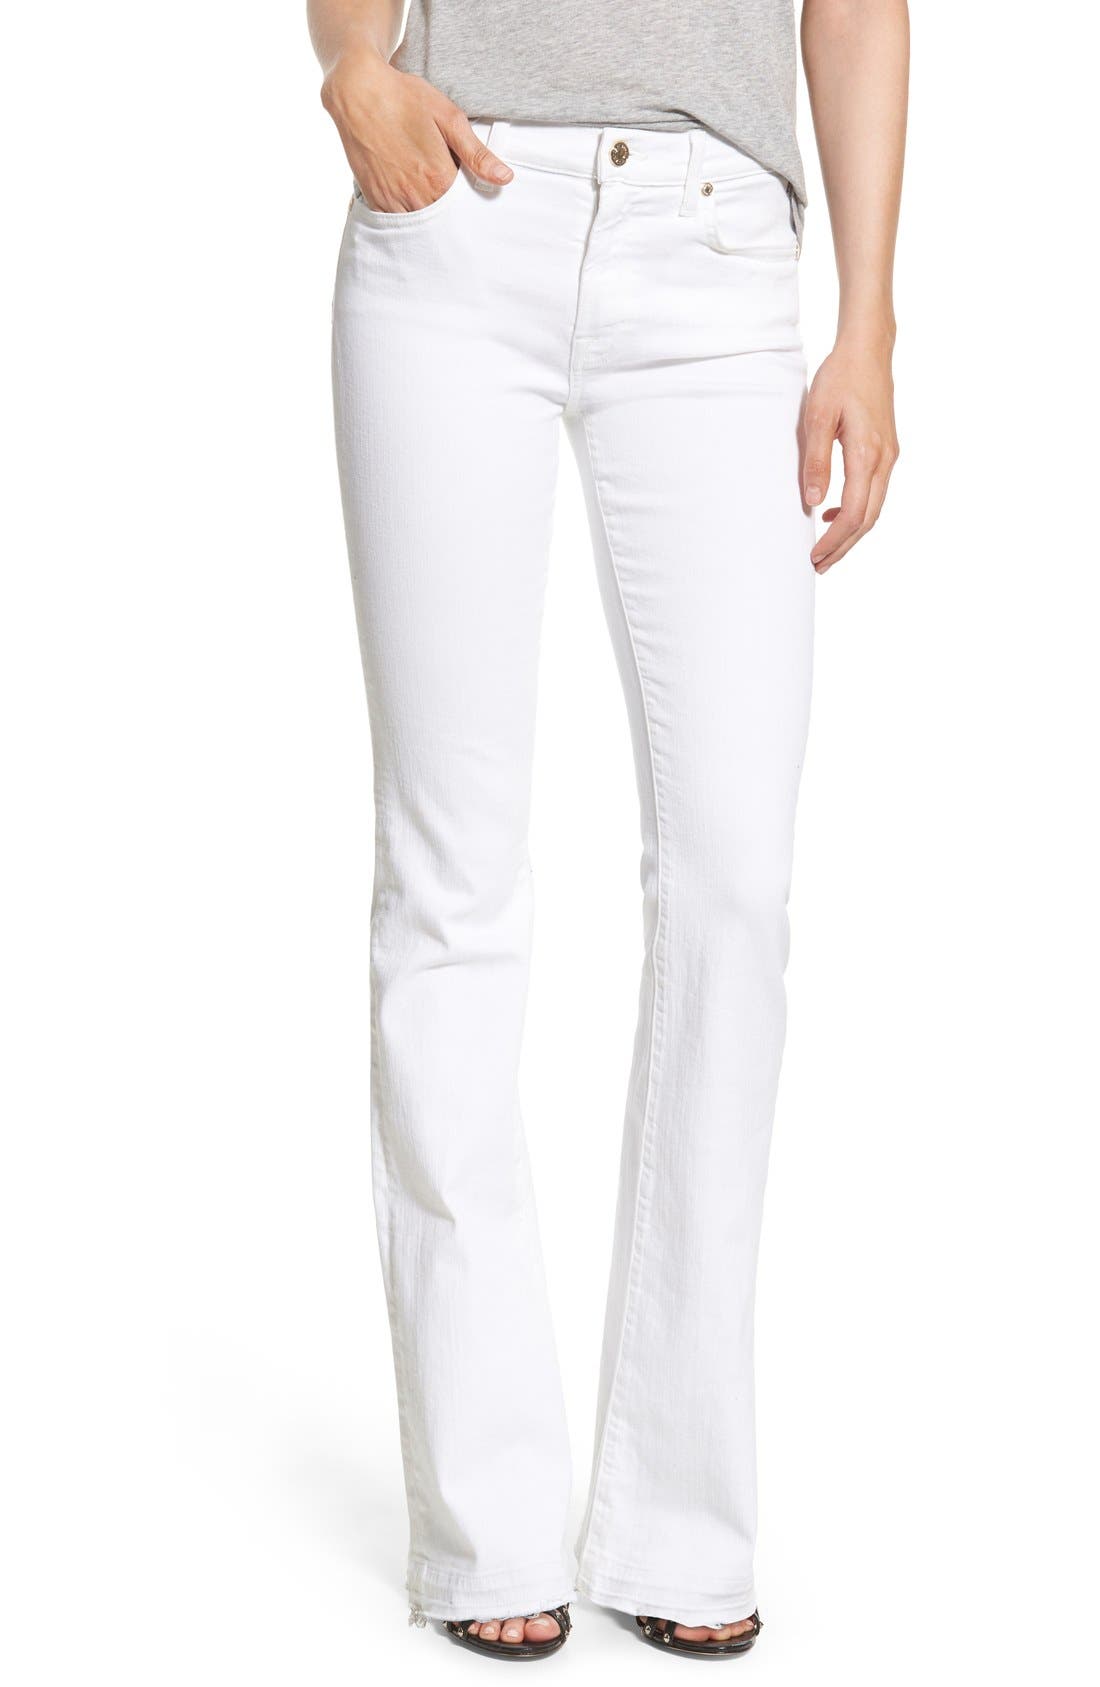 seven for all mankind white jeans